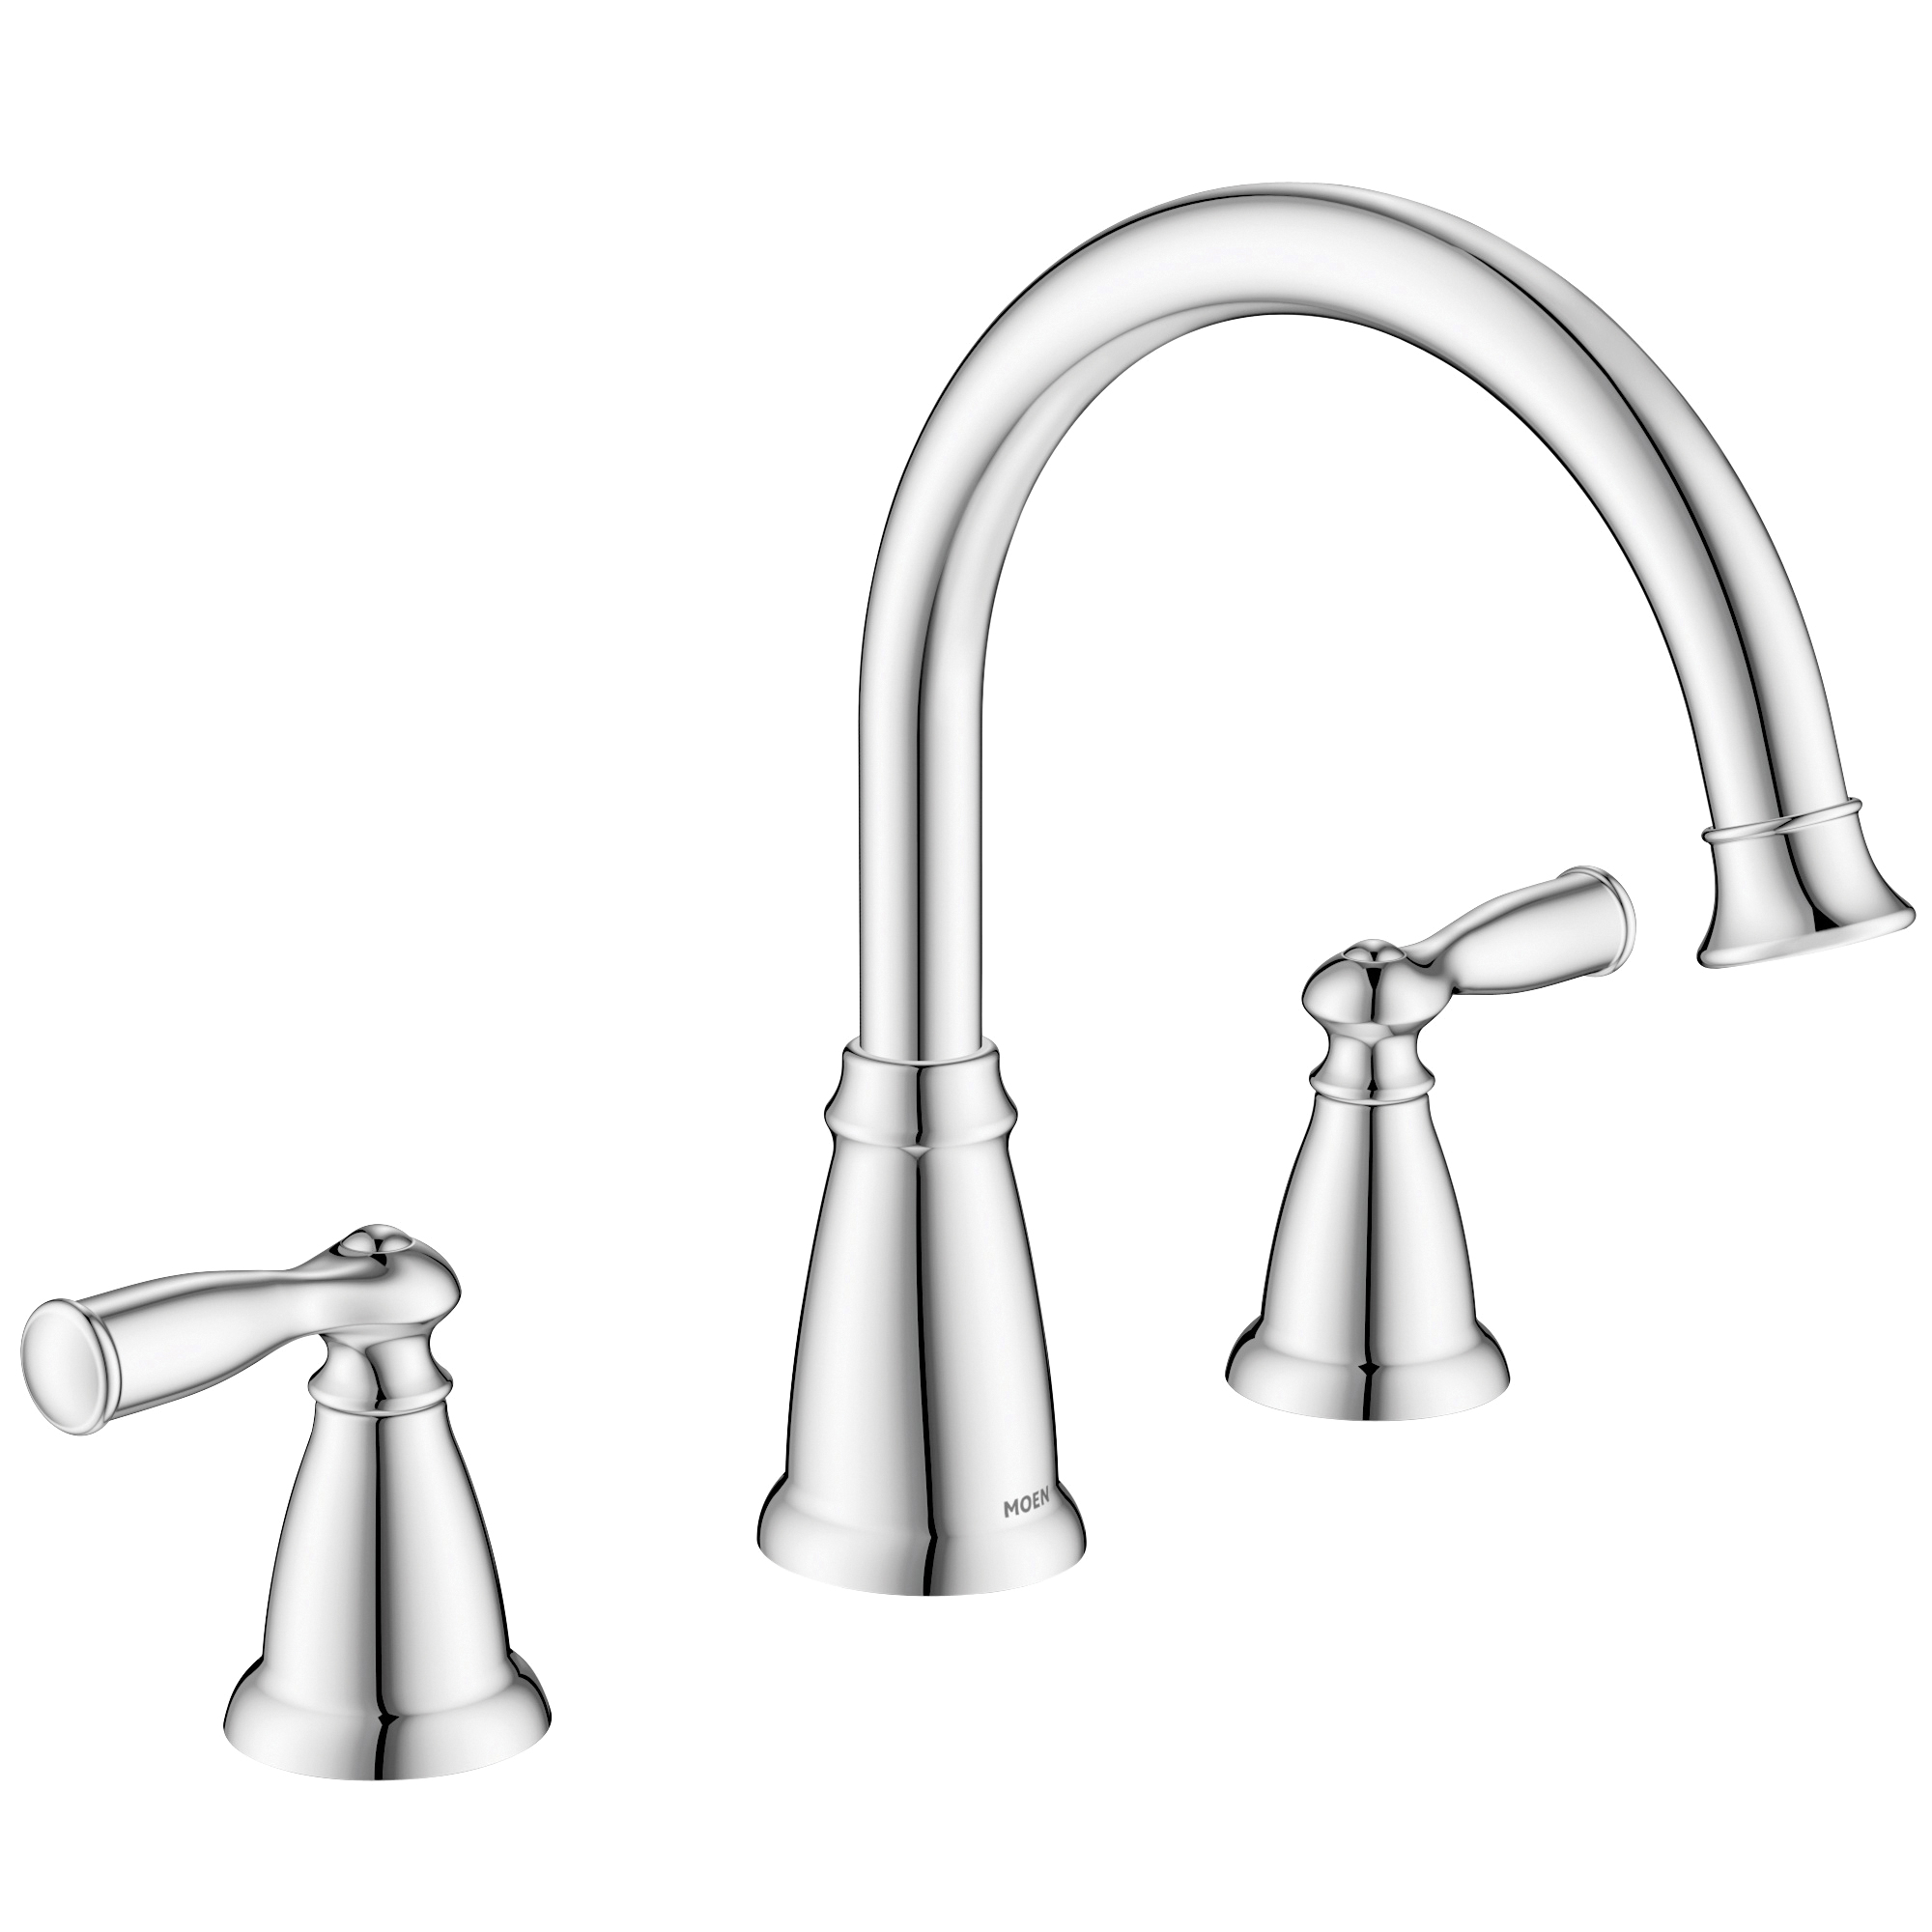 Moen Banbury Series 86924 Tub Faucet, 16 gpm, 2-Faucet Handle, Lever Handle, Stainless Steel, Chrome Plated